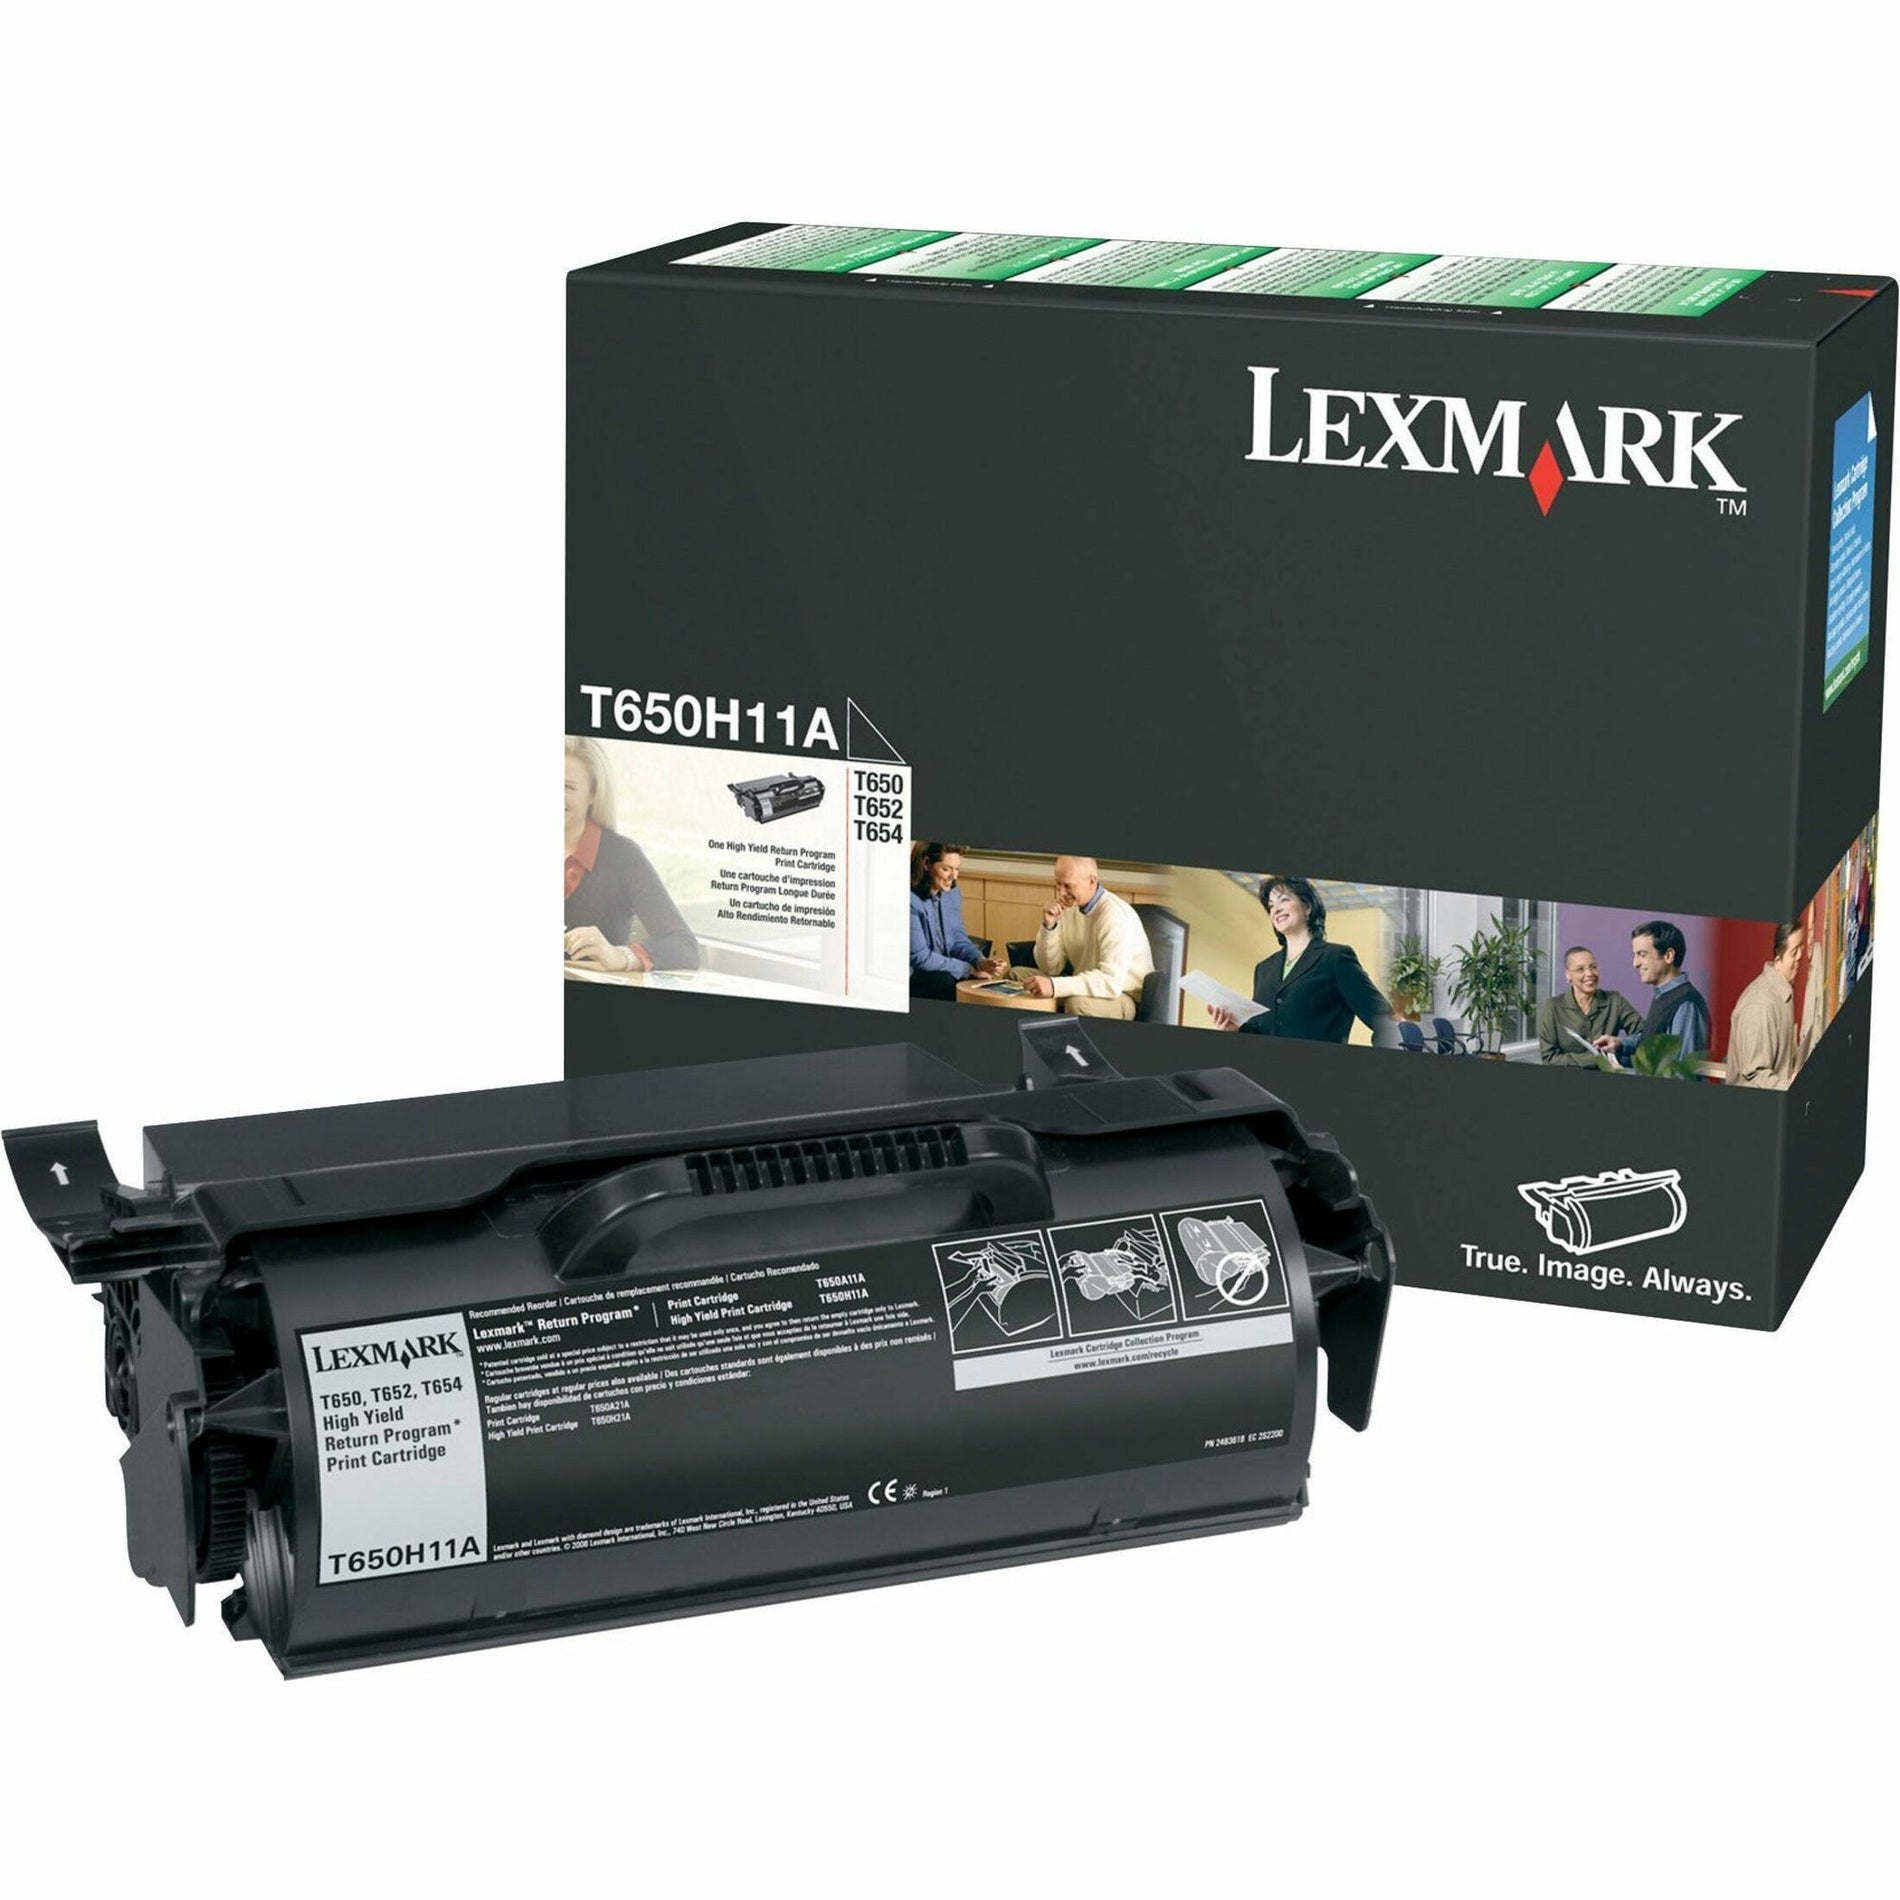 Lexmark T650H11A T650A11A/H11A Toner Cartridge, 25000 Page Yield, Black